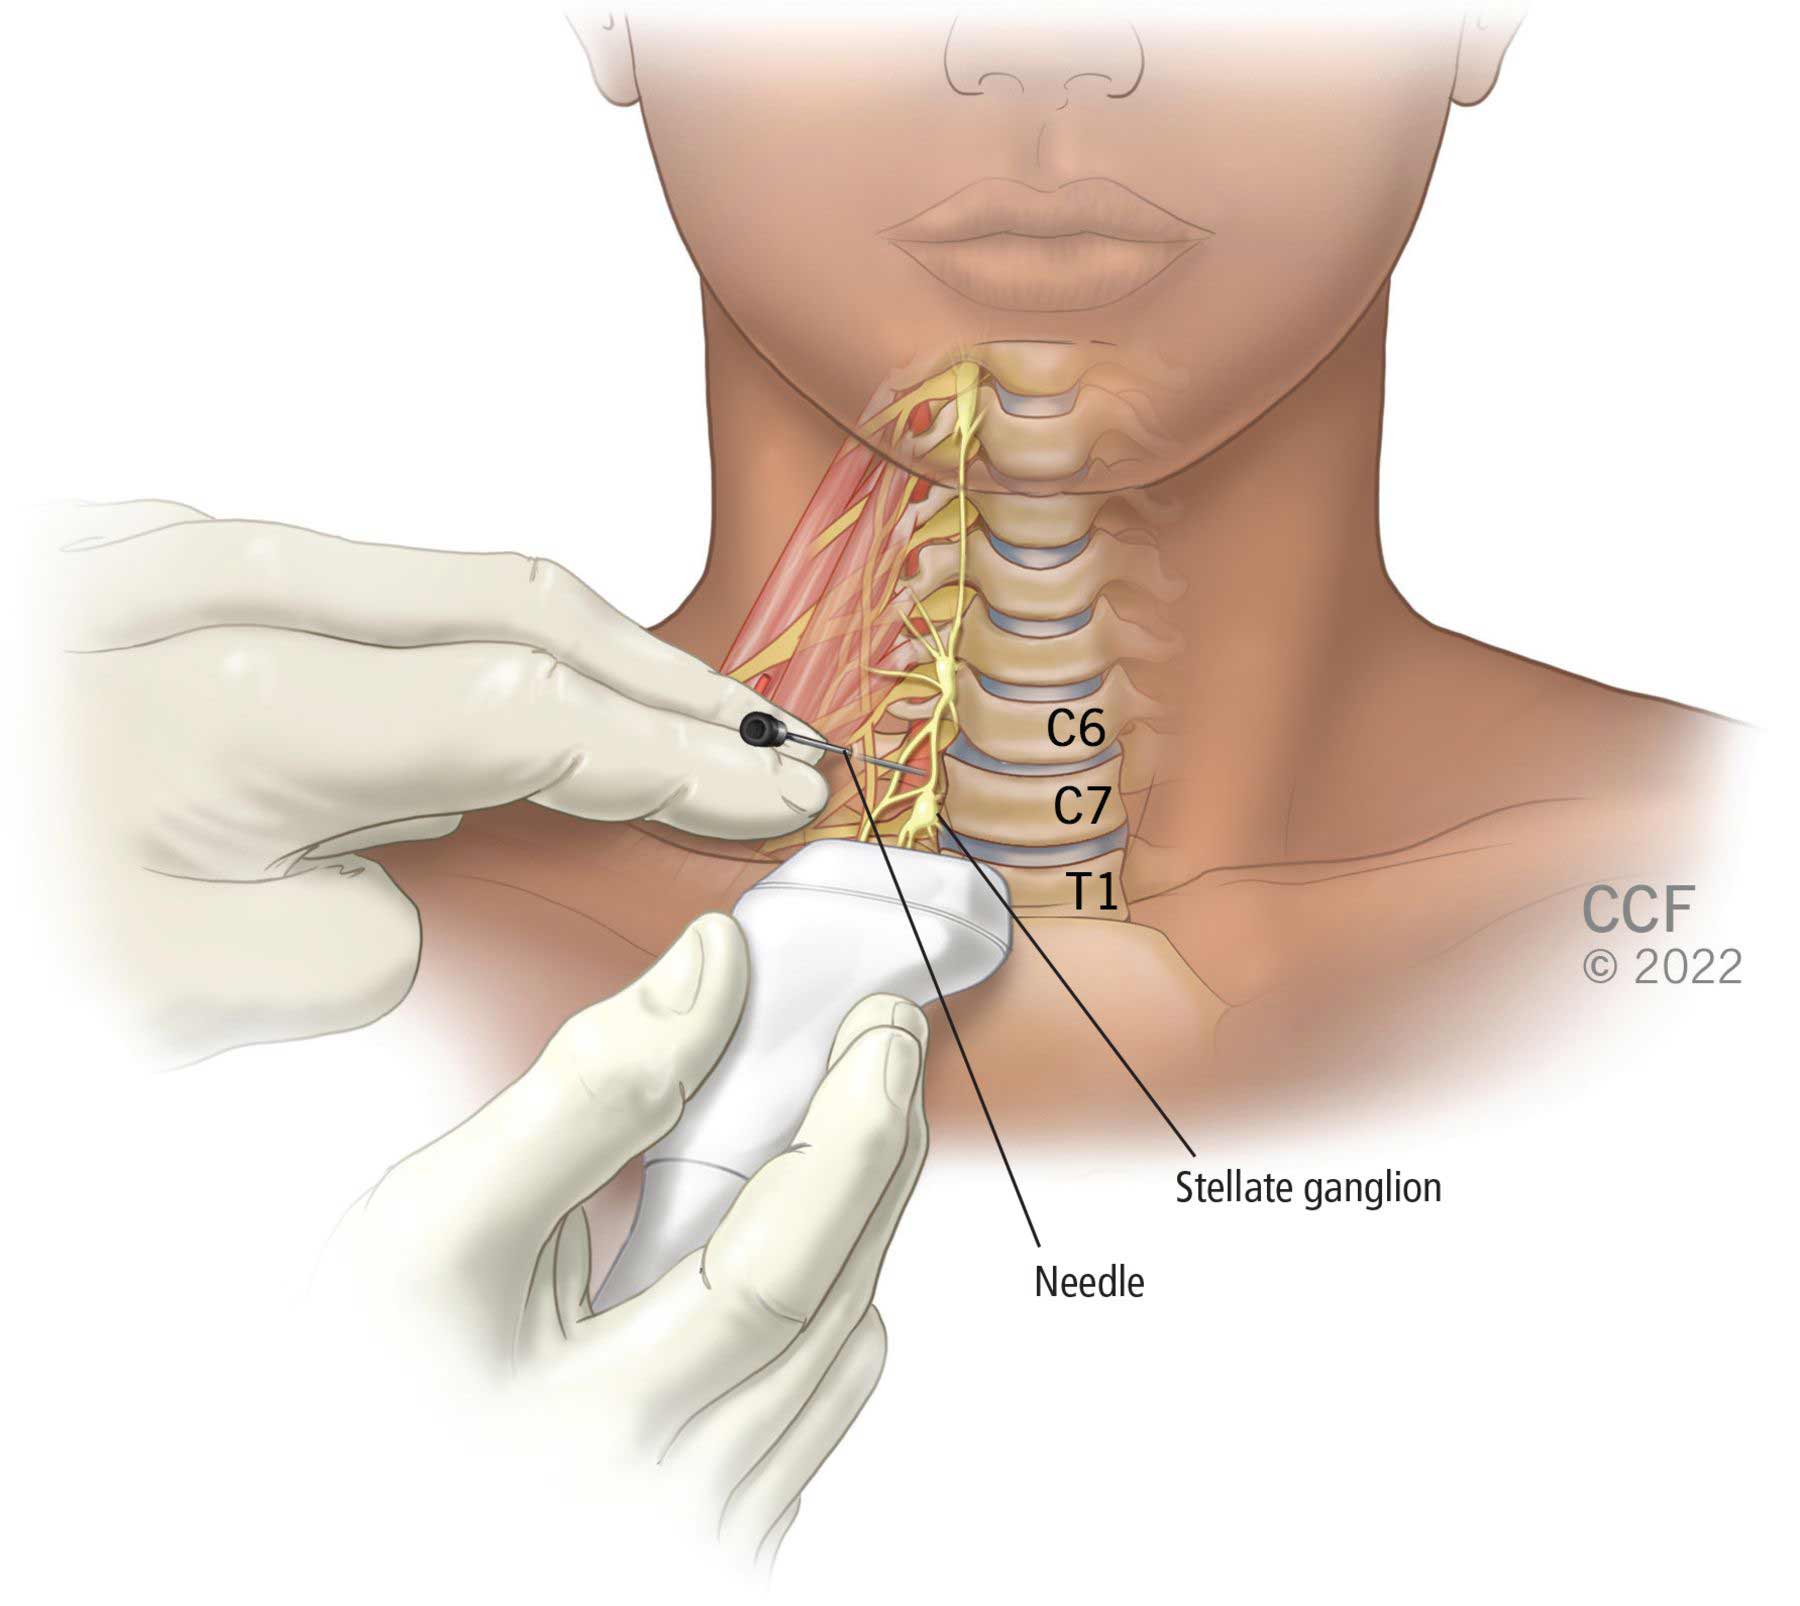 Illustration showing anatomical location of the stellate ganglion, which is on the front side of the neck next to the C7 and T1 vertebrae.